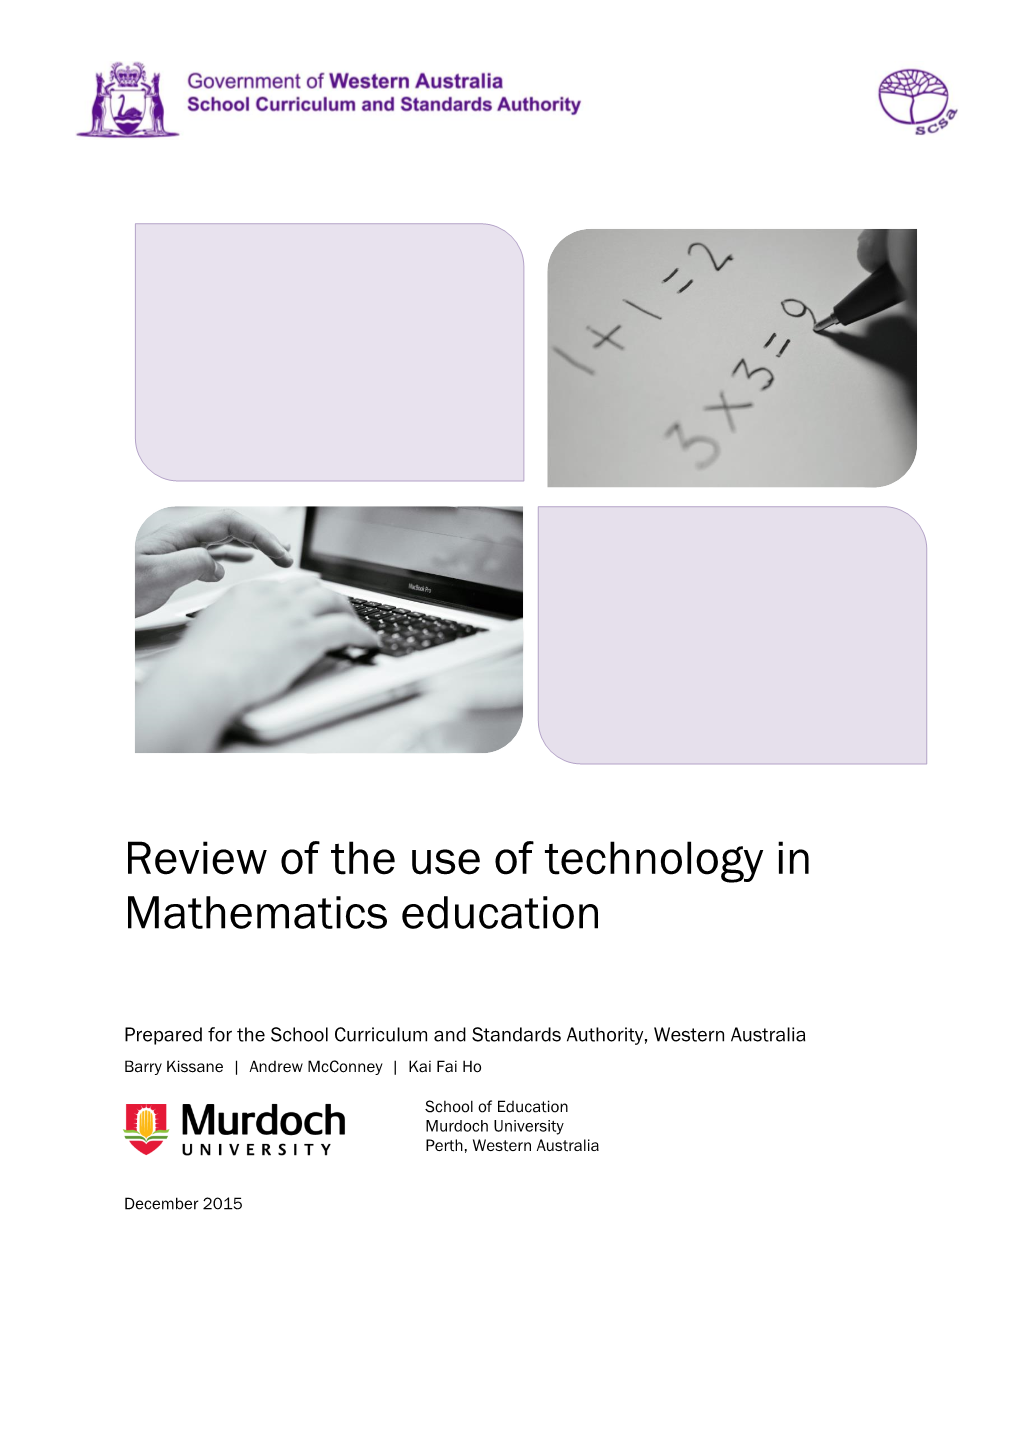 Review of the Use of Technology in Mathematics Education